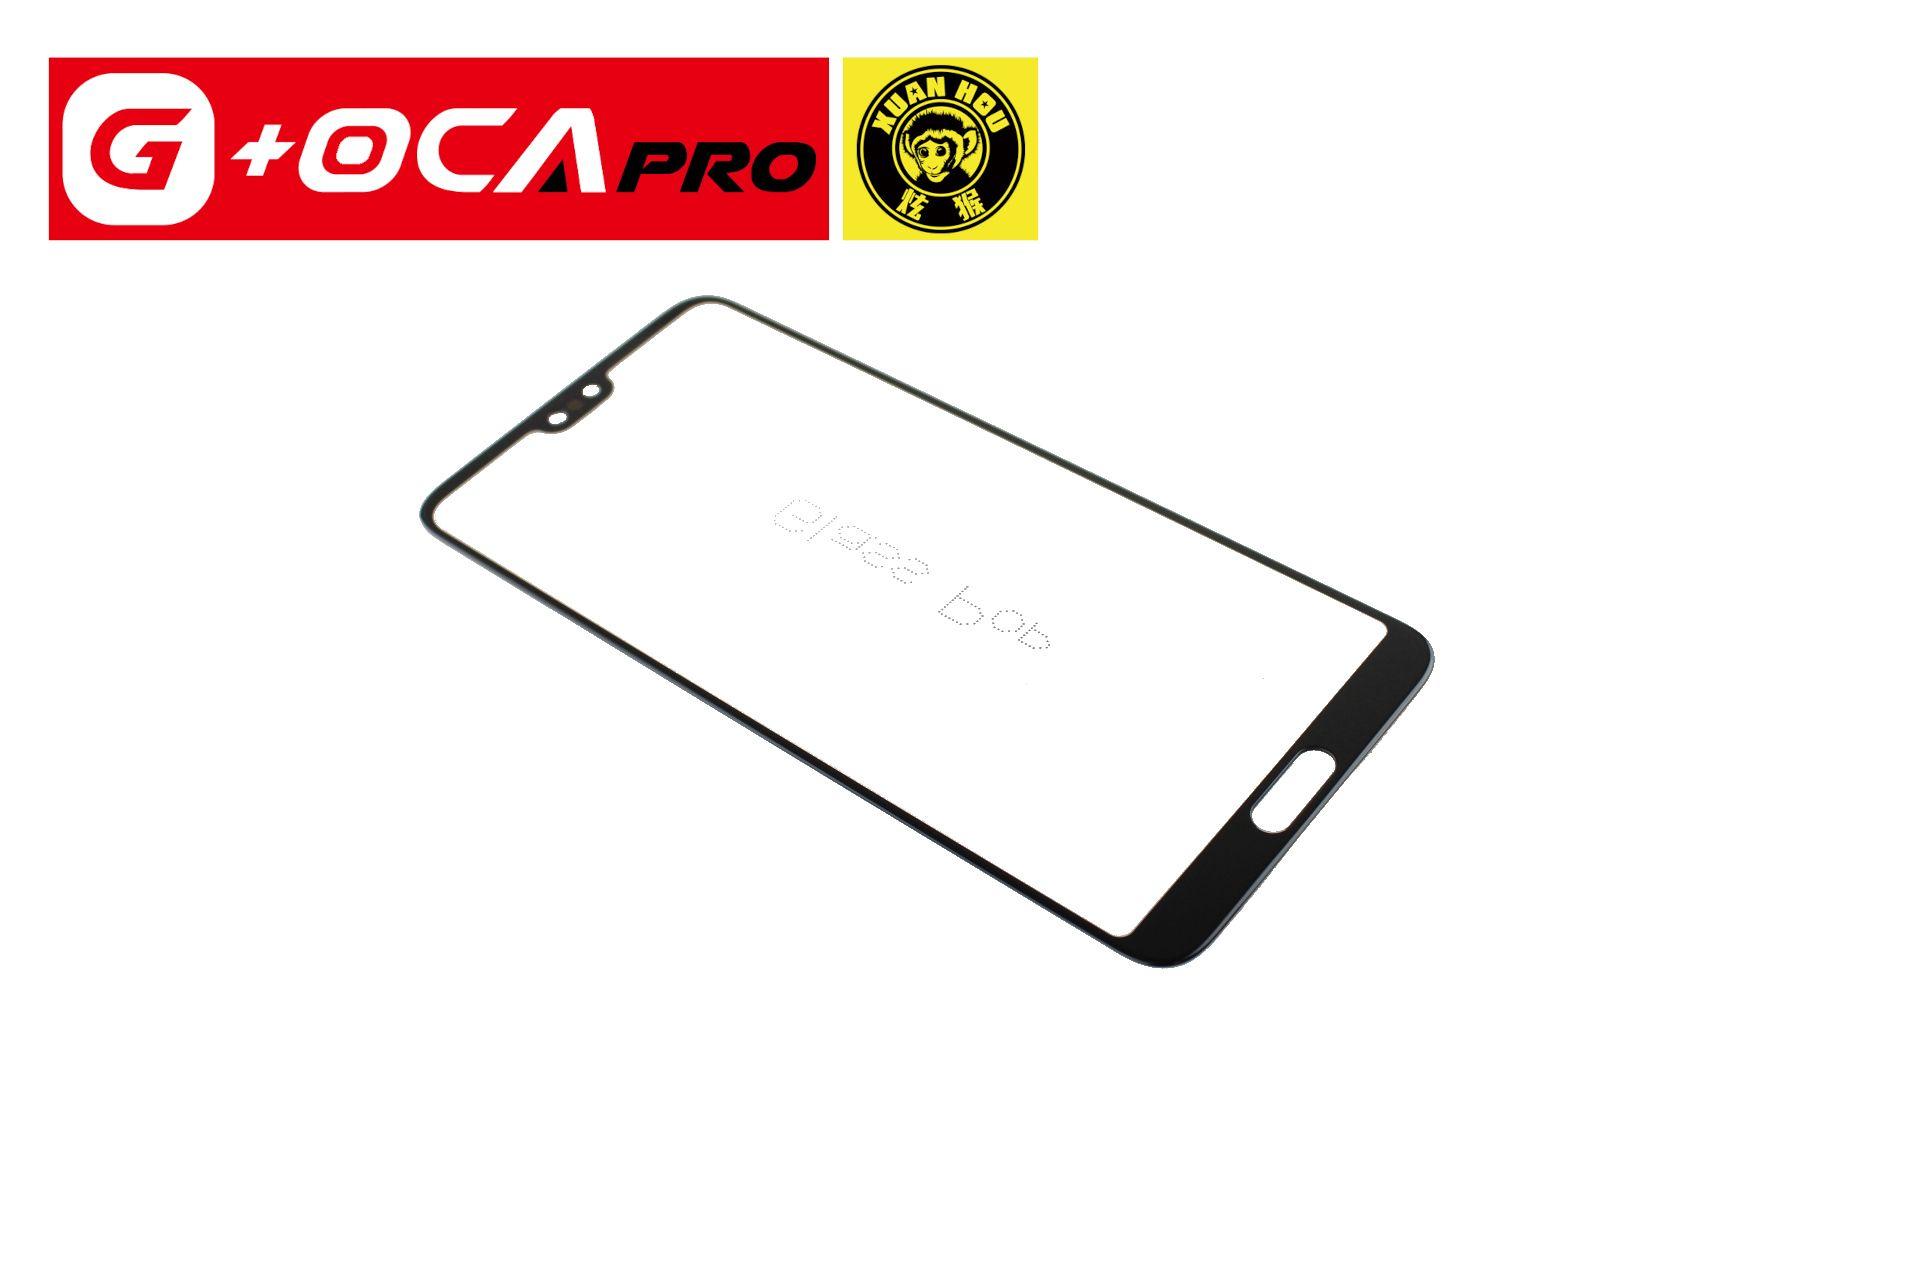 Glass G + OCA Pro (with oleophobic cover) Huawei P20 Pro